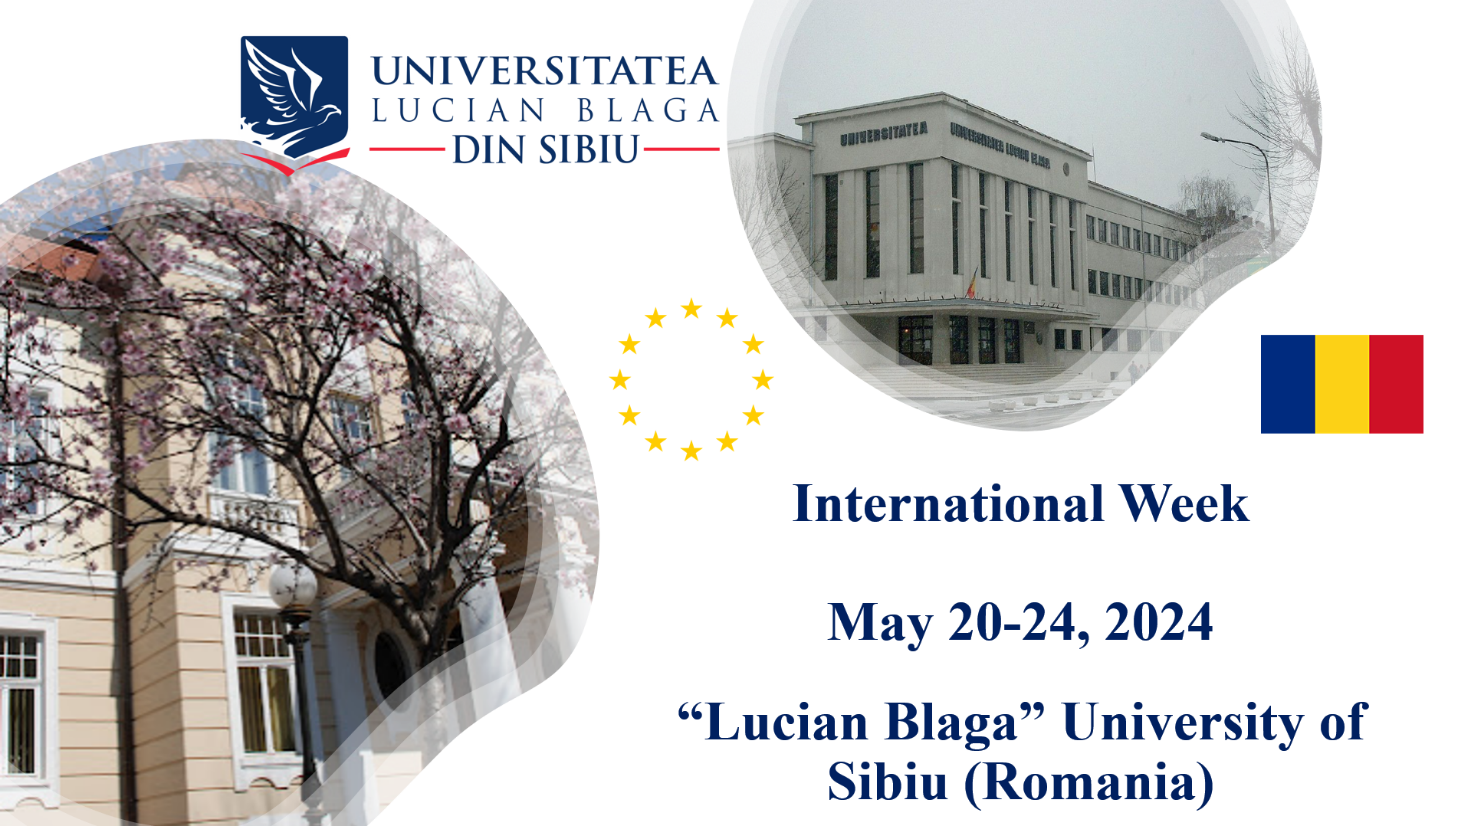 Scientists of Polytechnic are invited to take part in an international event at the Romanian partner university “Lucian Blaga” University of Sibiu